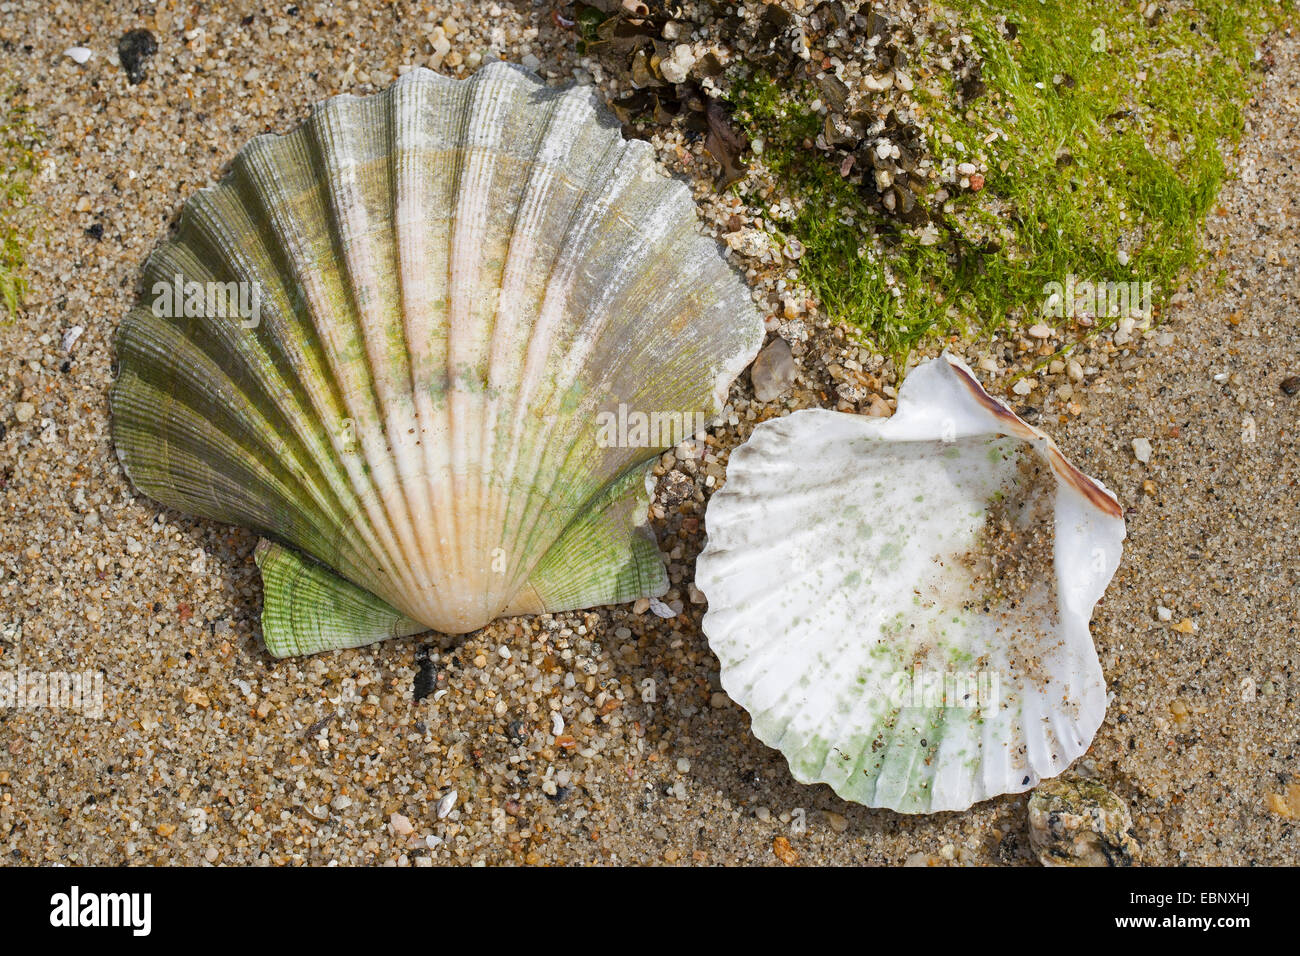 Great scallop, Common scallop, Coquille St. Jacques (Pecten maximus), two shells on the beach Stock Photo